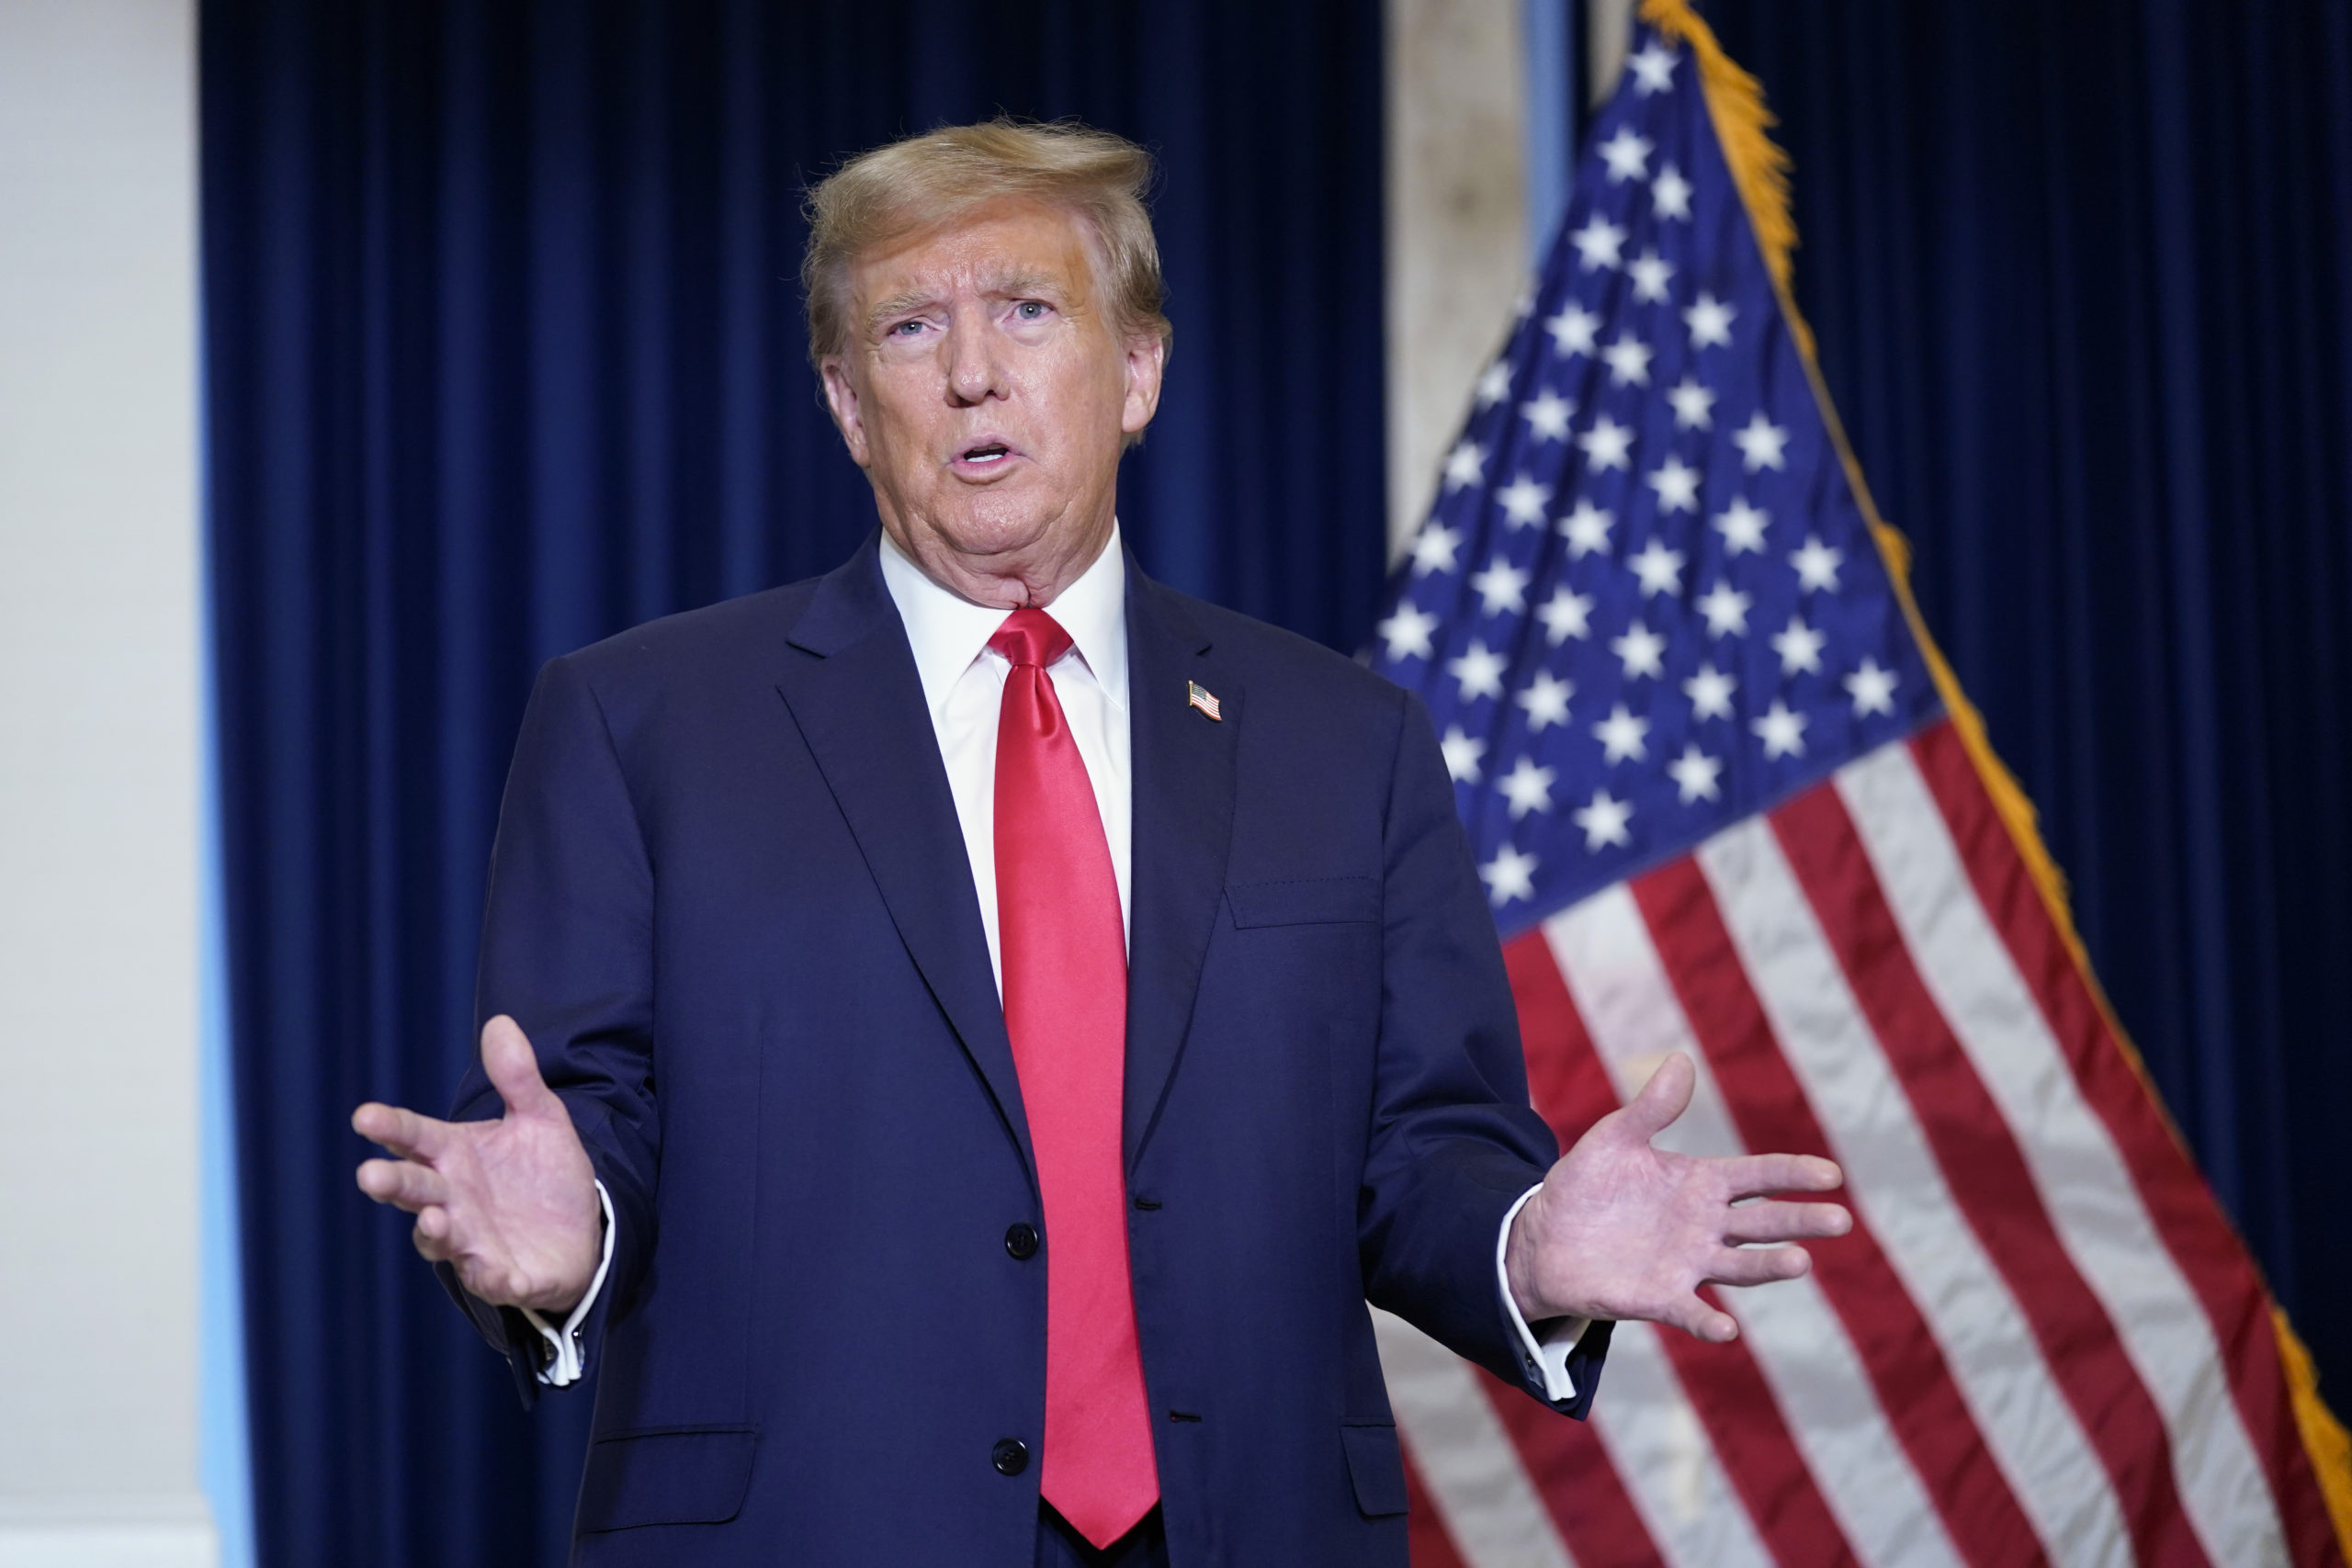 Former President Donald Trump speaks to the media at a Washington hotel Tuesday after attending a hearing before the D.C. Circuit Court of Appeals at the federal courthouse in Washington.